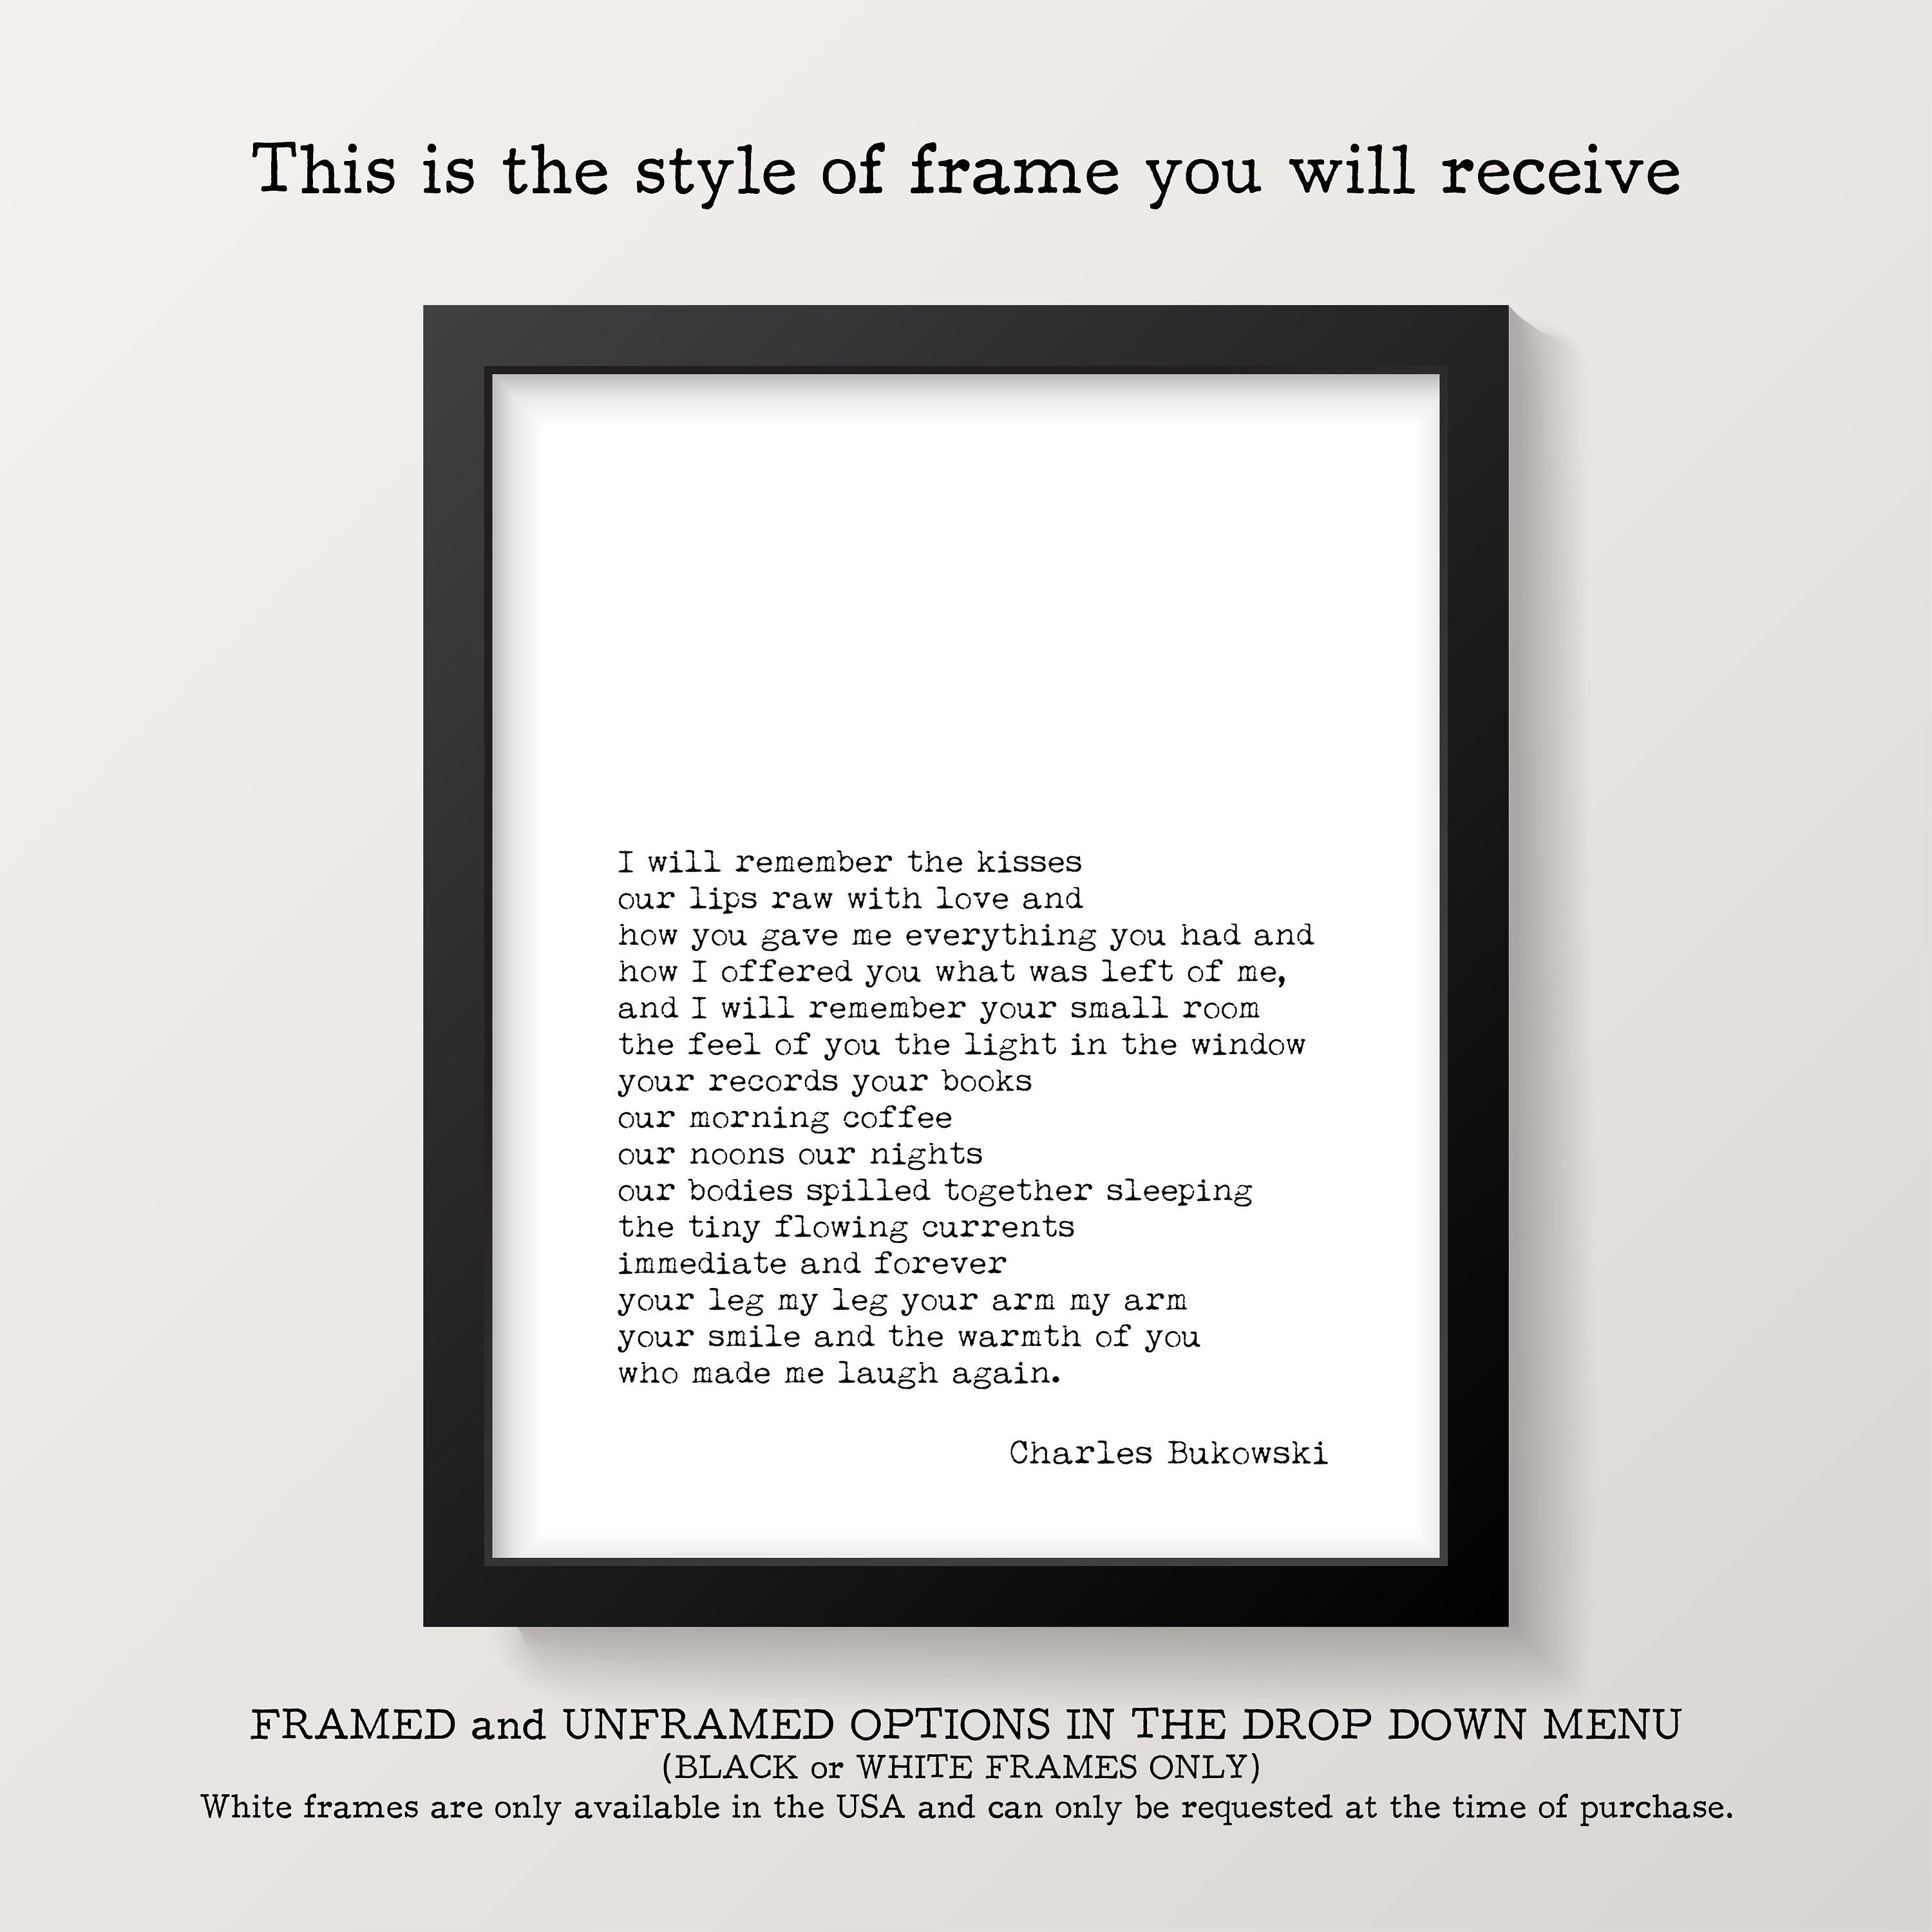 The Great Gatsby Quote Print, Literary Art Poster